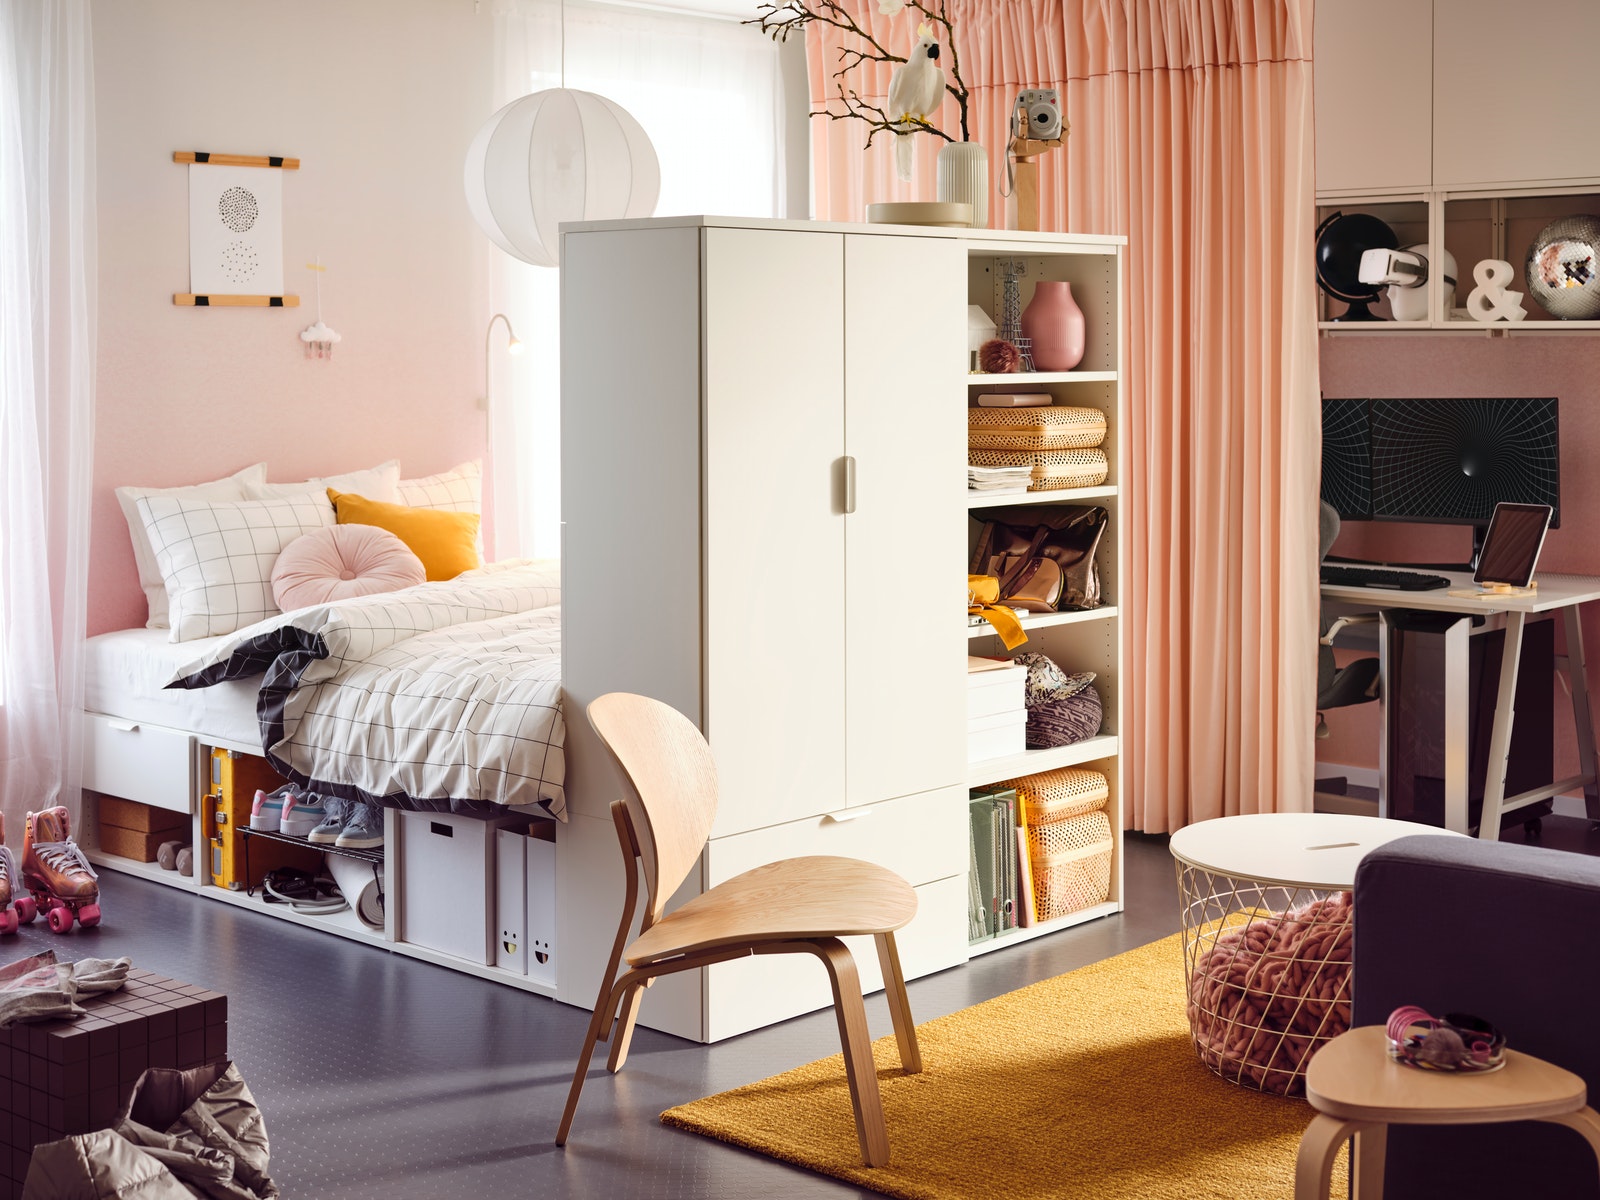 IKEA - A 24-hour bedroom that fits around your style